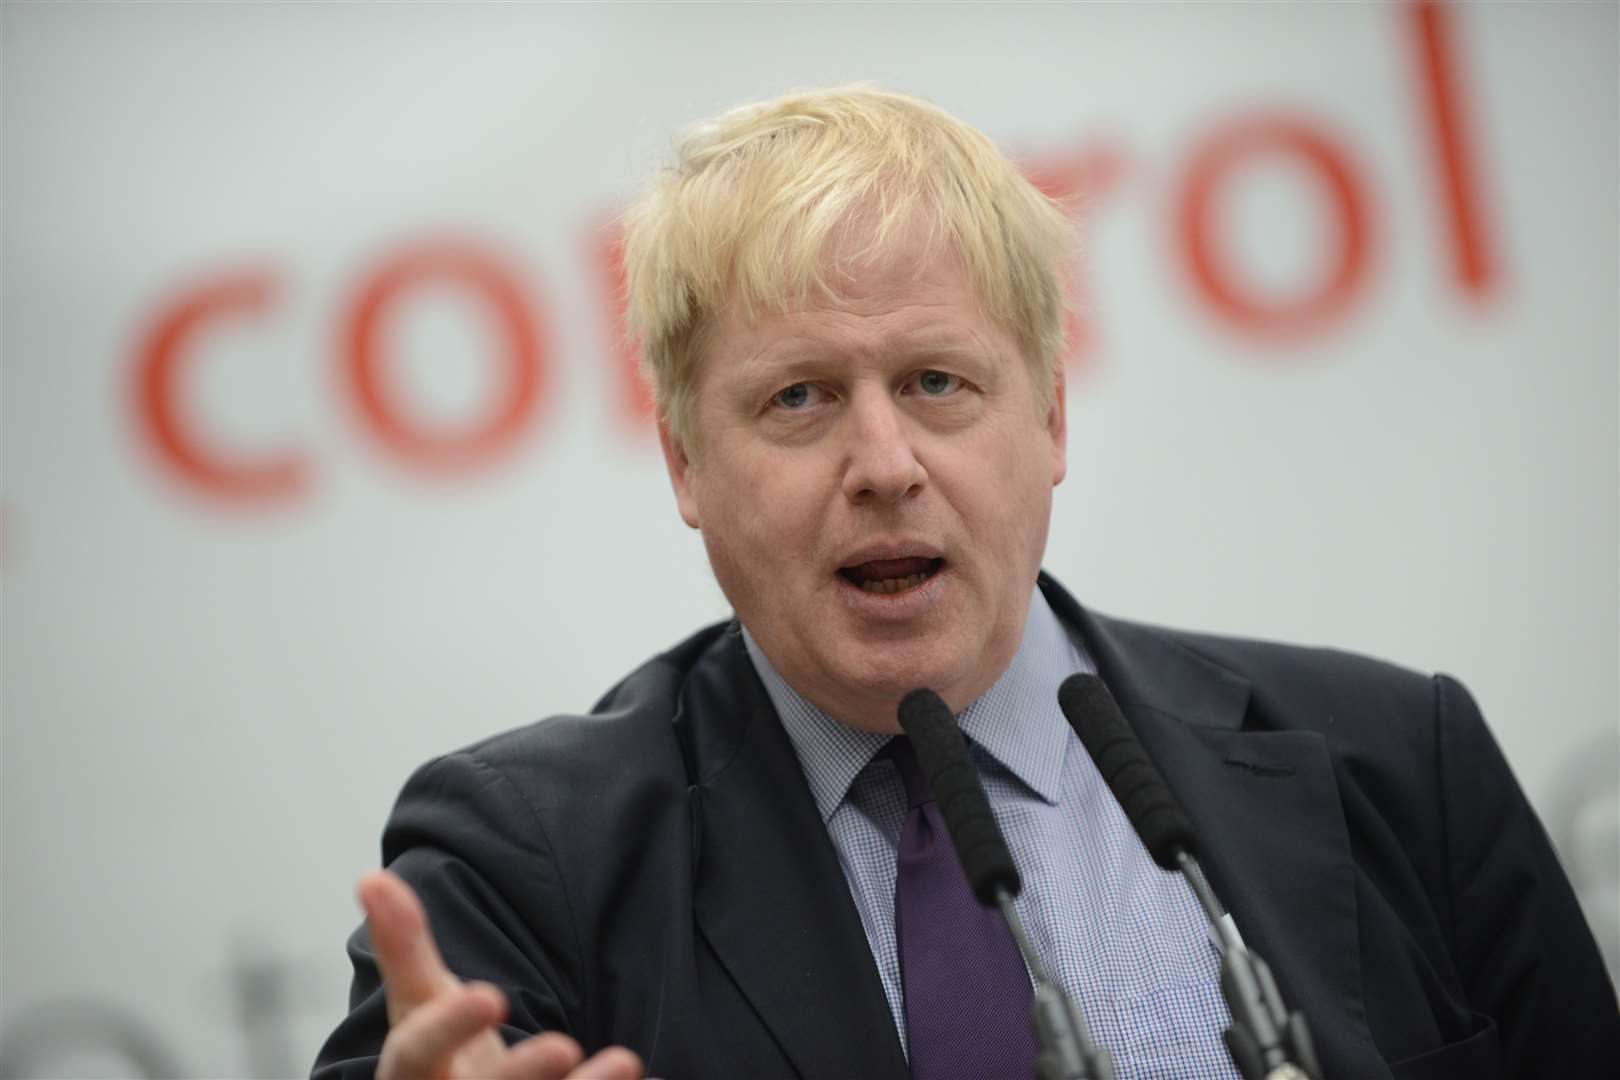 Boris Johnson is the favourite in race, having shown strong leads in votes so far